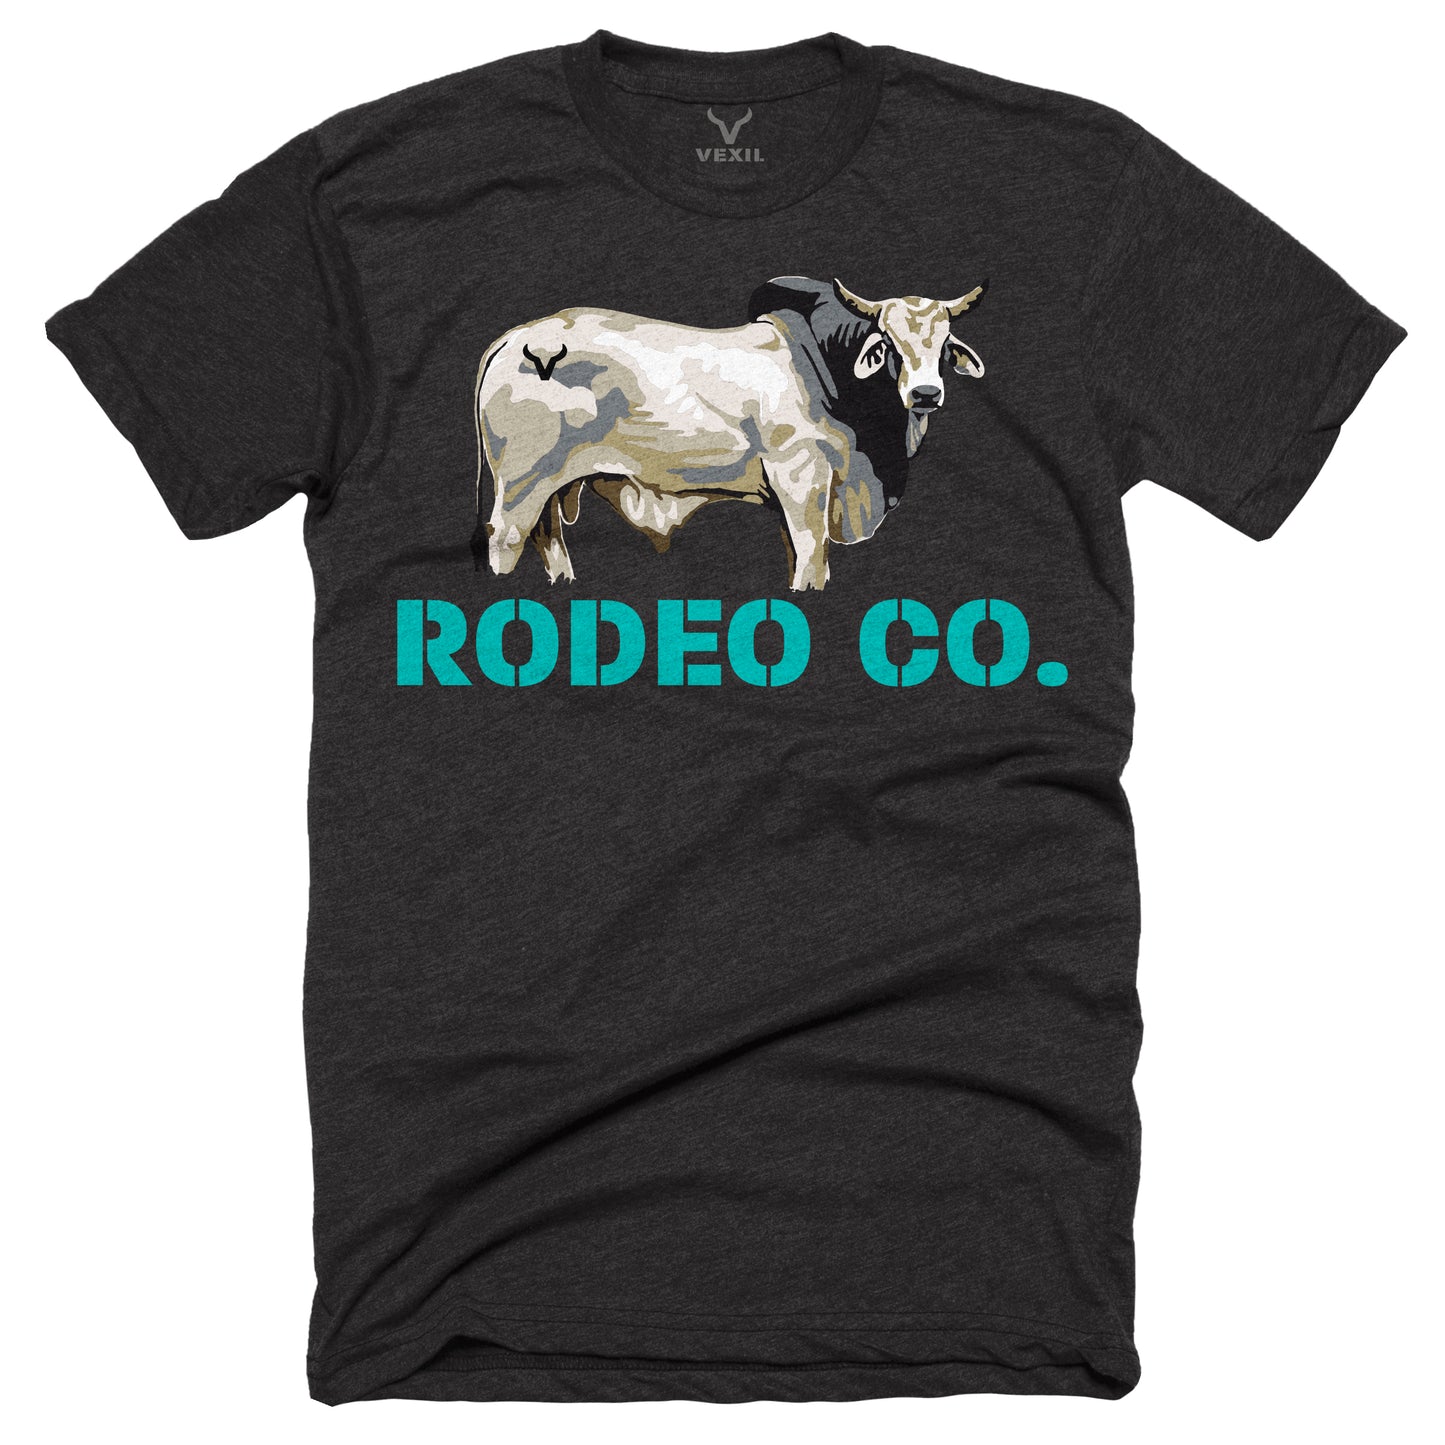 Rodeo Co. - Brahma Bull - Bringing you the greatest show on dirt.  Quality Stock, Quality Entertainment 🤠